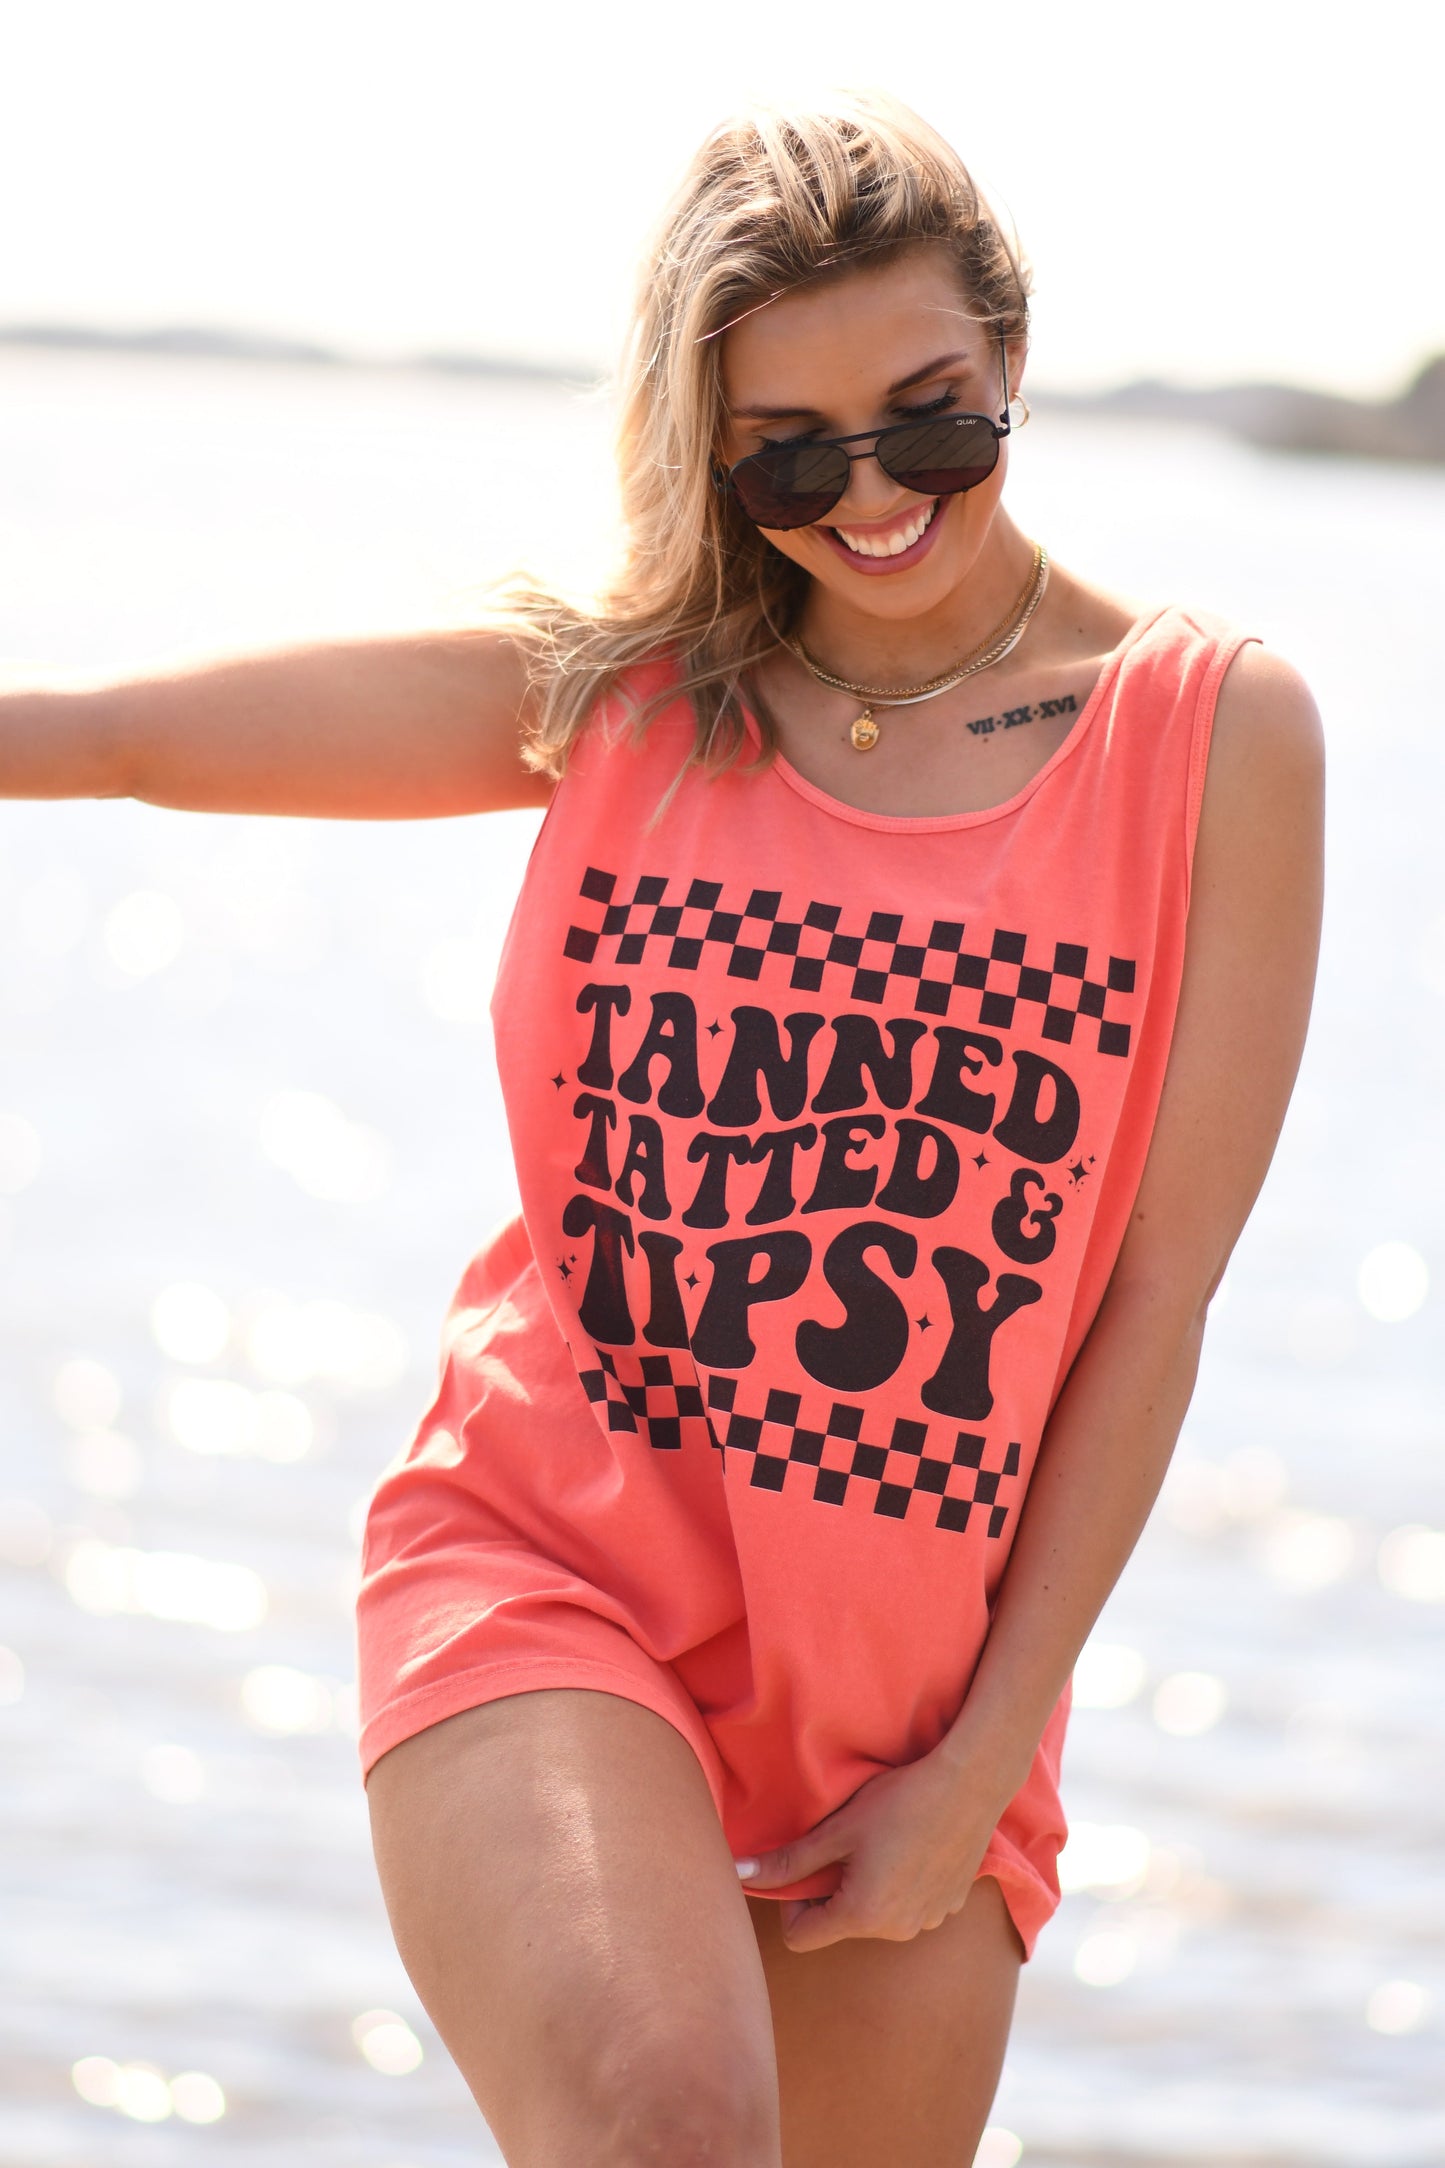 Tanned Tatted And Tipsy Tank/Tee